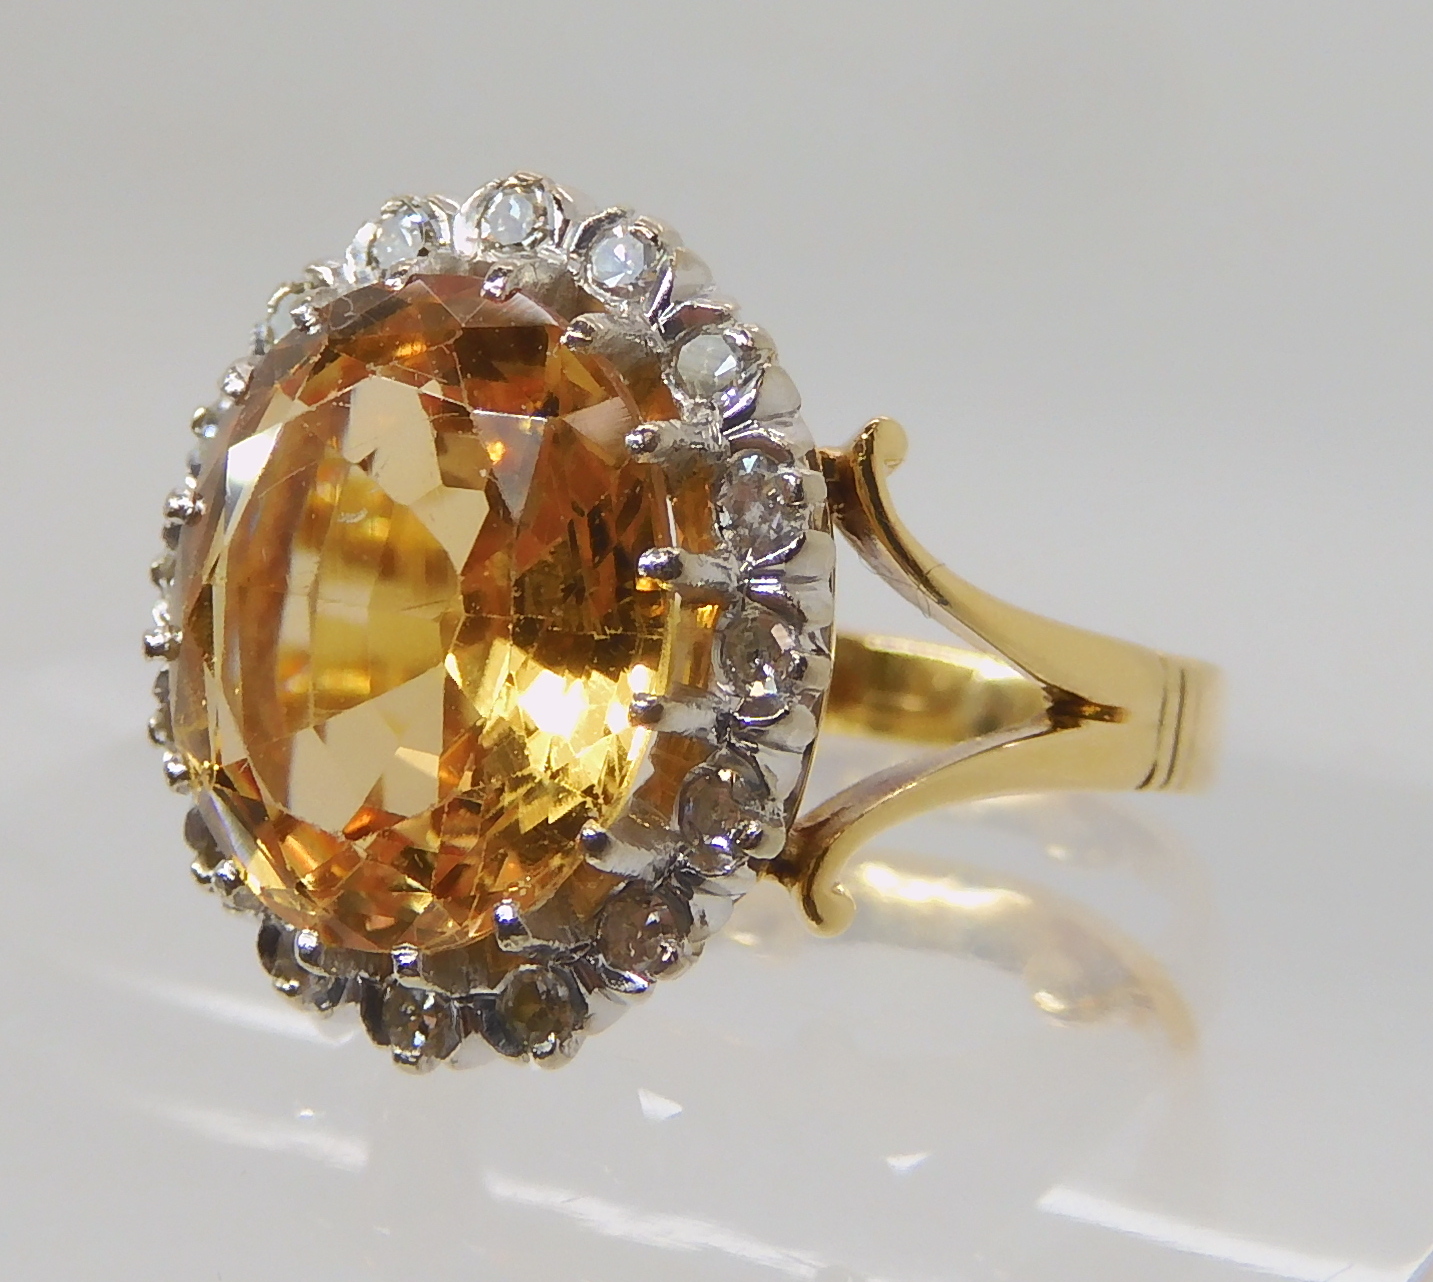 A bright yellow metal ring set with a yellow topaz surrounded with a ring of eight cut diamonds, - Image 2 of 4